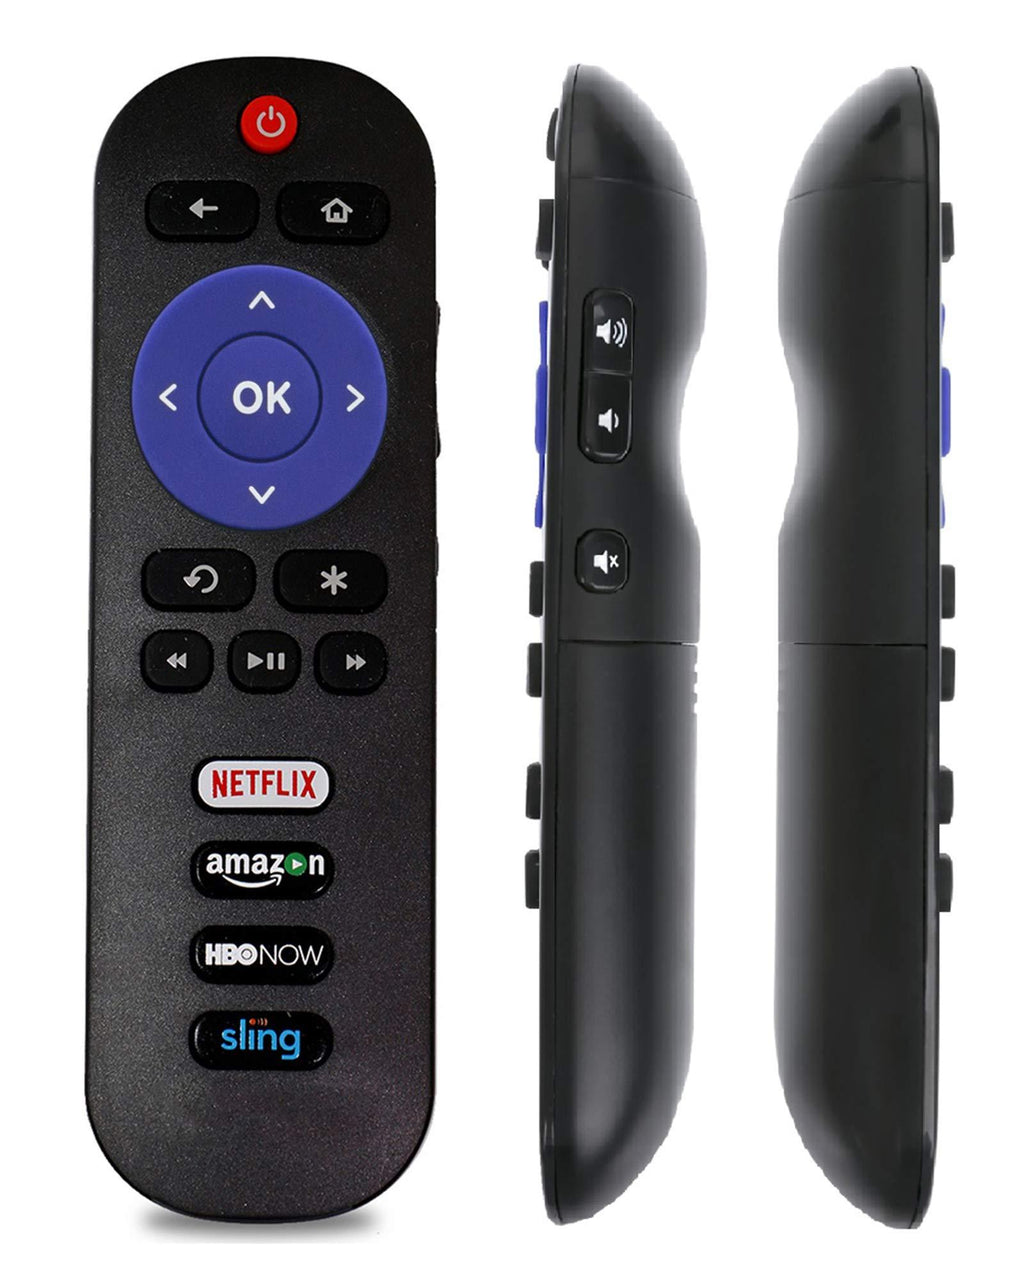 New Replace Remote Control fit for TCL ROKU TV RC280 49S405 28S3750 32FS3700 32FS4610R 32S800 32S850 32S3700 32S3850 32S3800 43FP110 55FS4610R 55FS3750 55FS3700 48FS3700 RC282 55P605 - LeoForward Australia